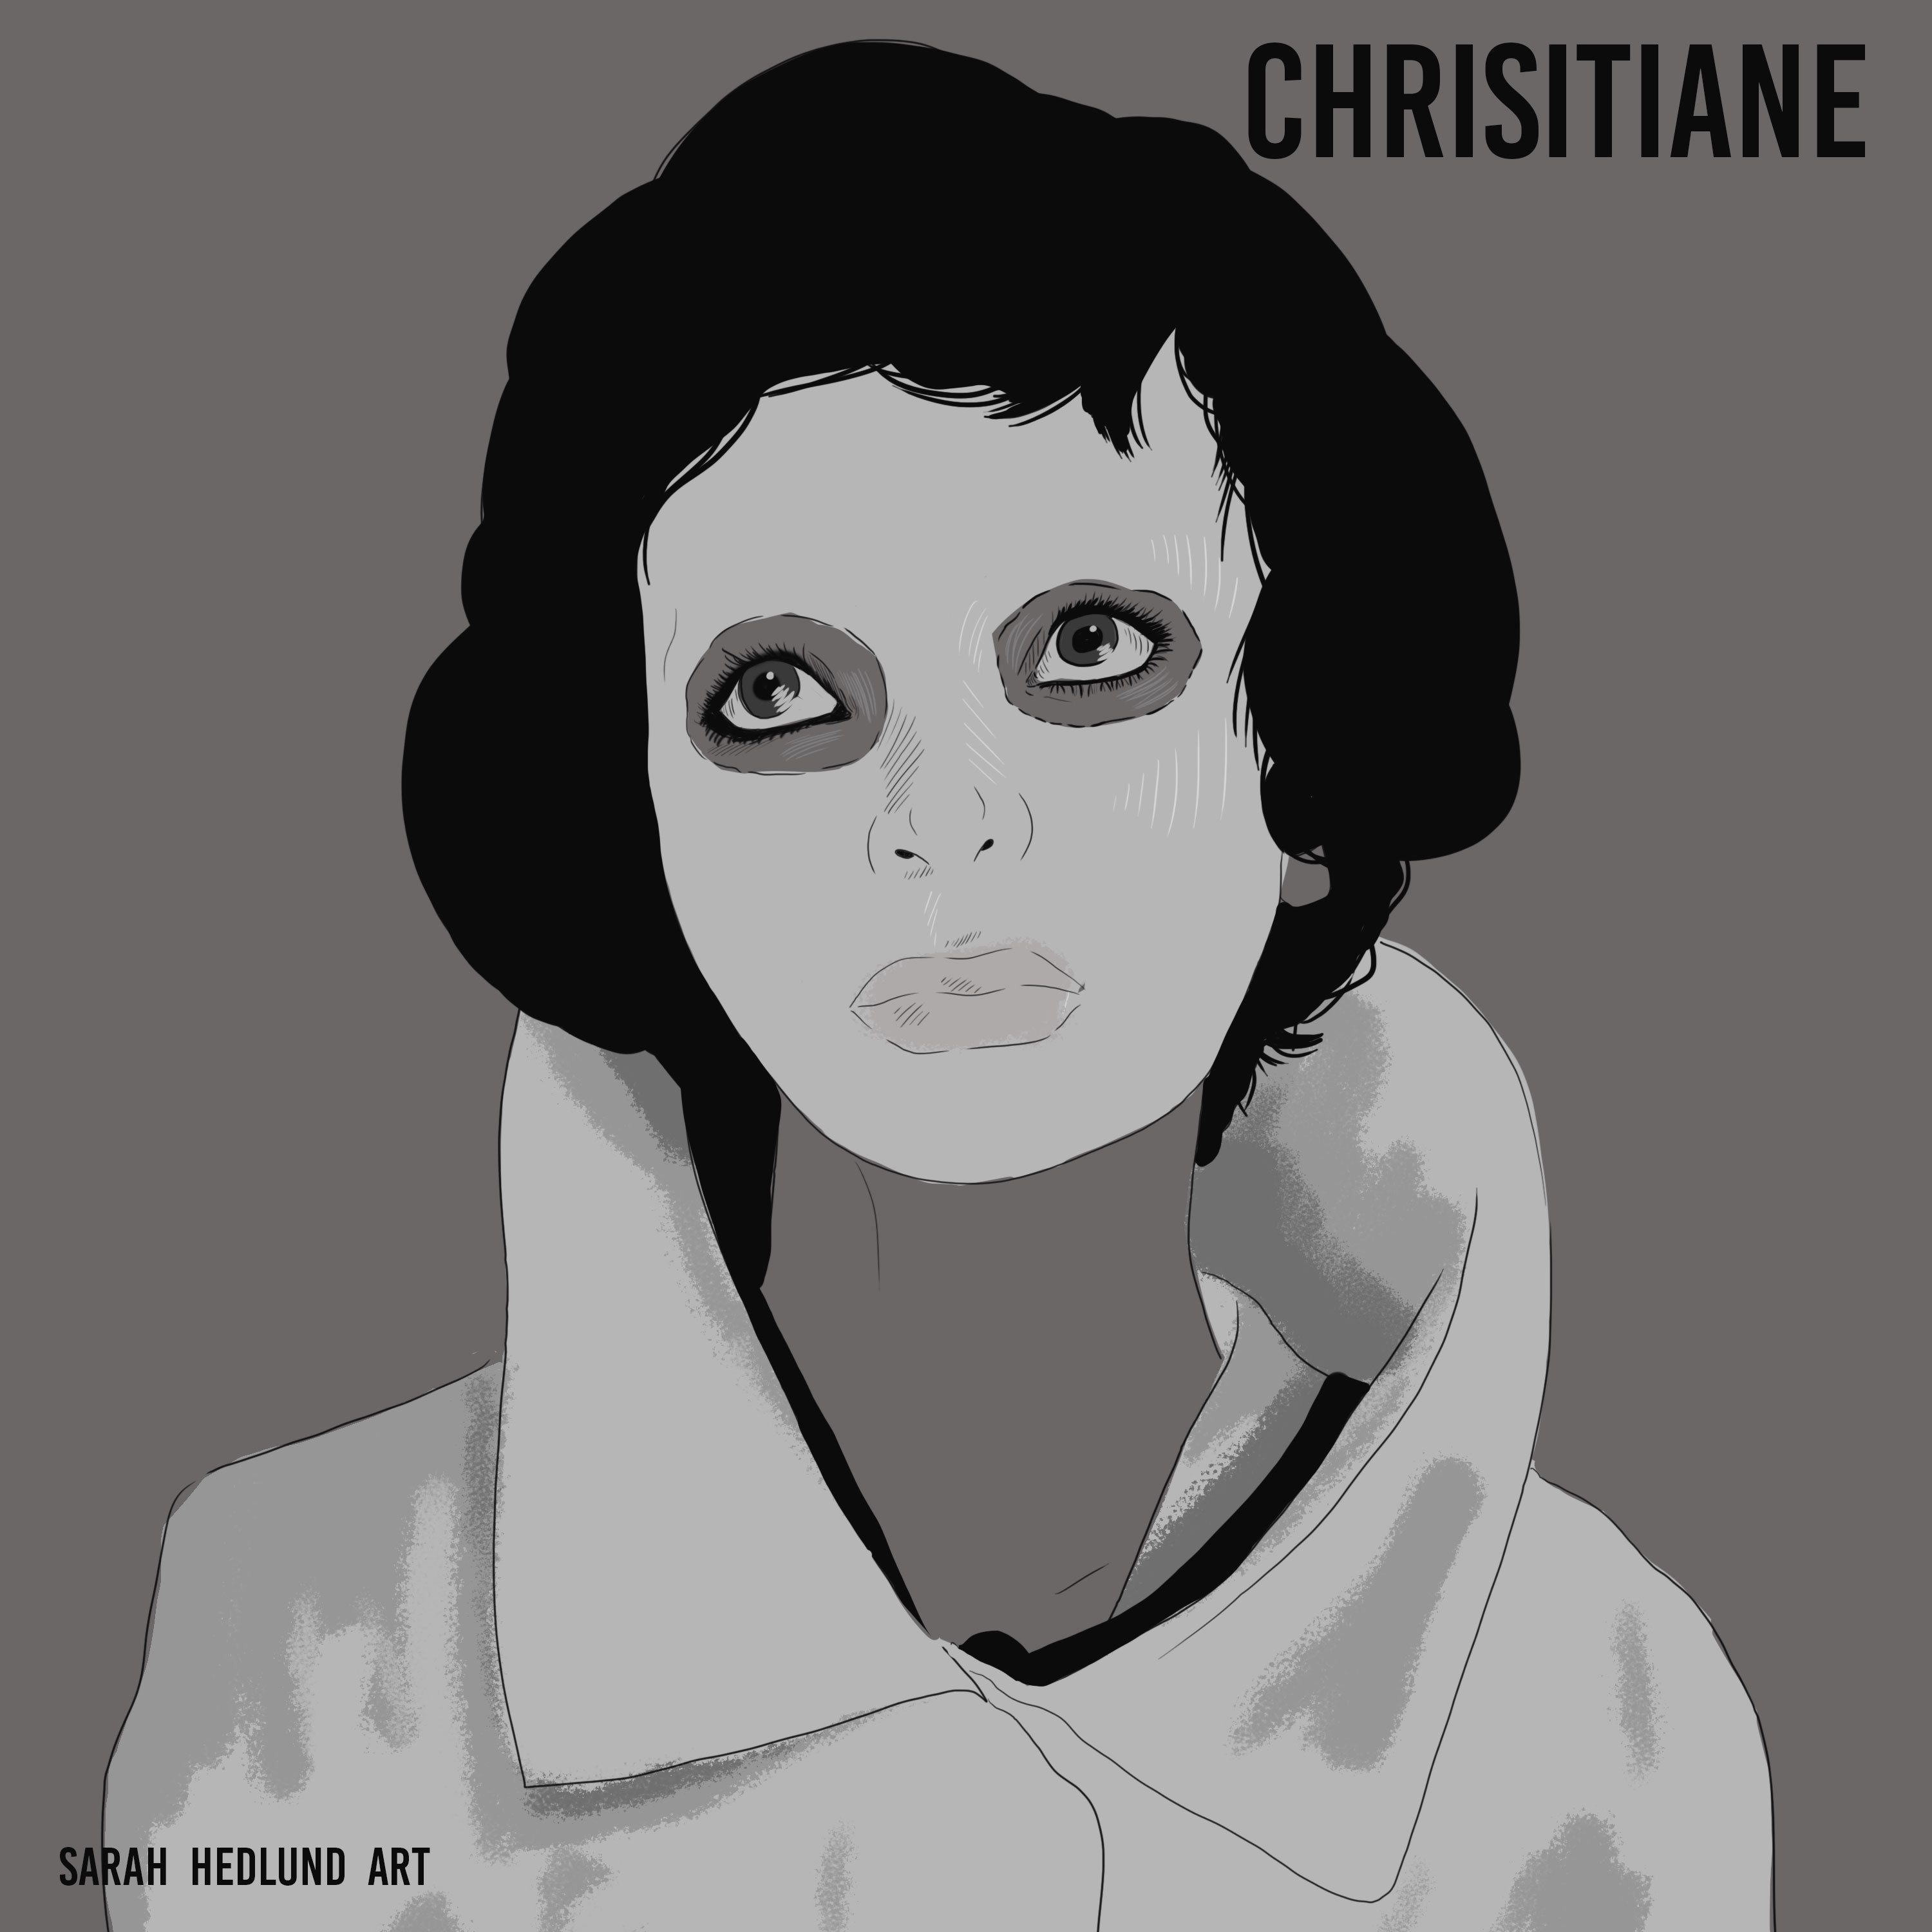 Day 22: Christiane (Edith Scob) Eyes Without a Face - 1960